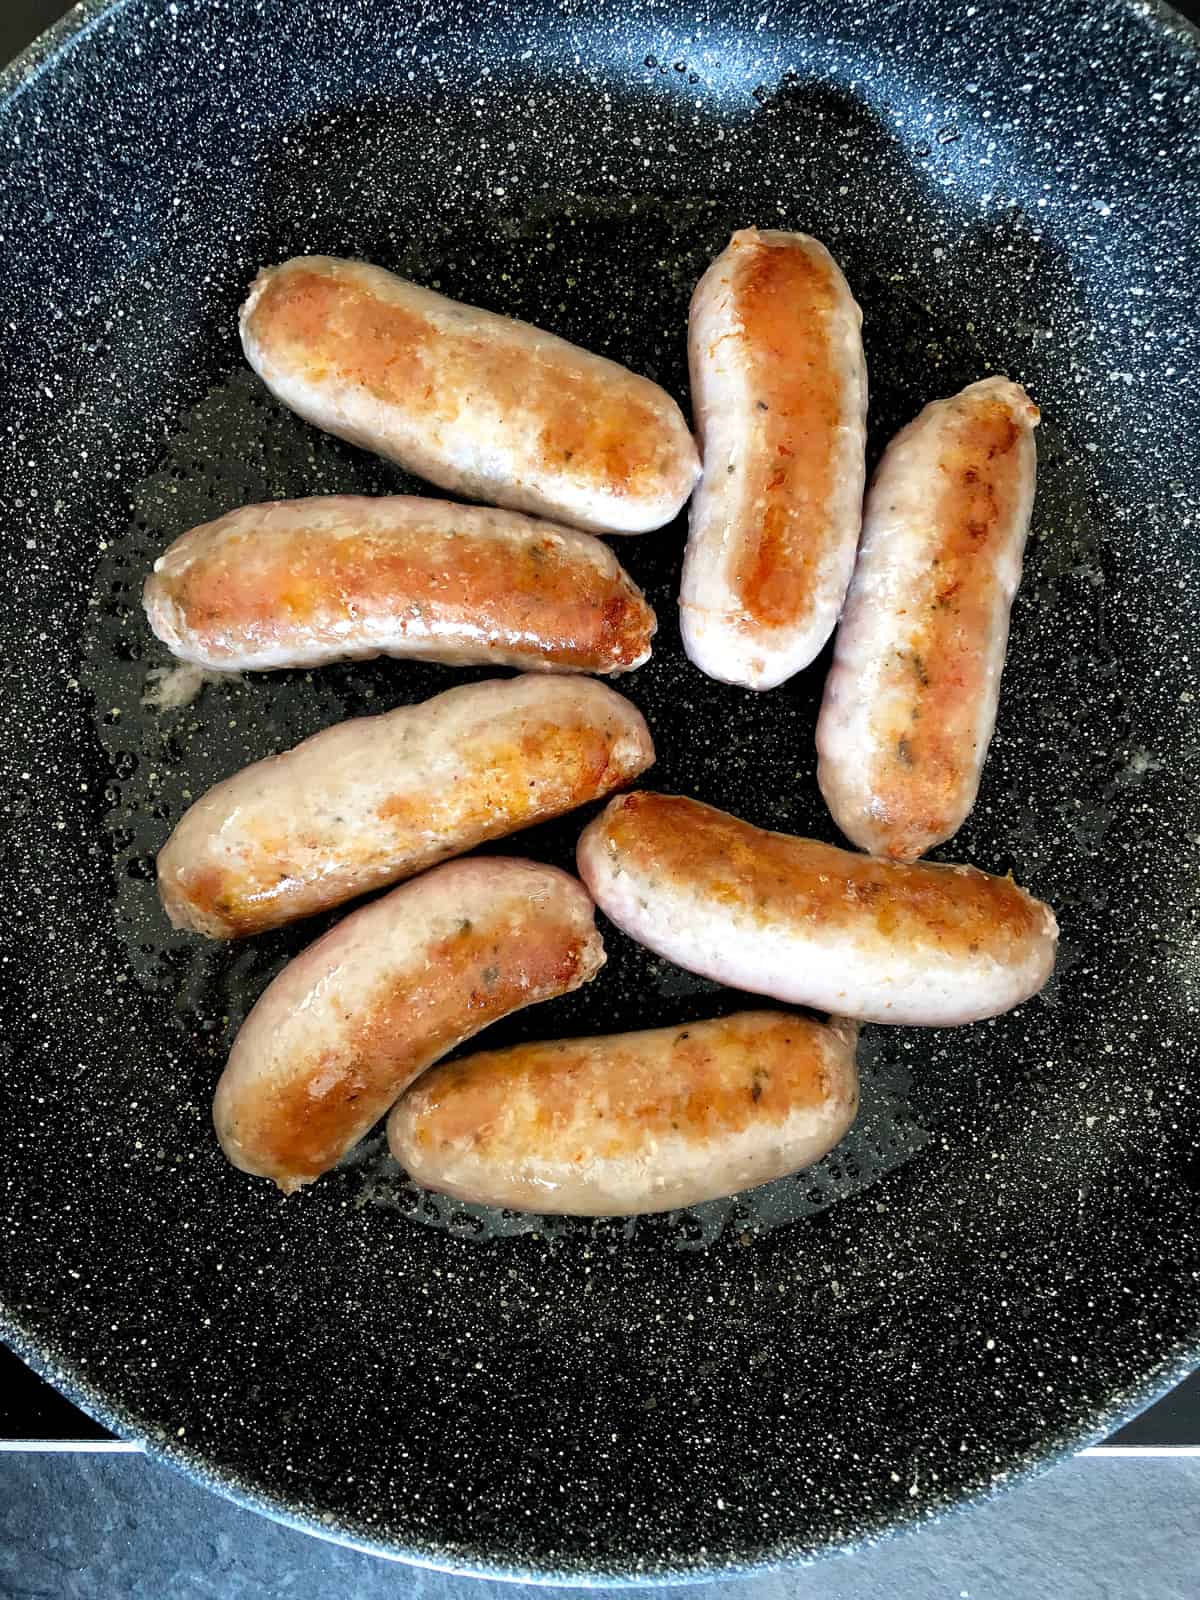 Browning sausages in a pan